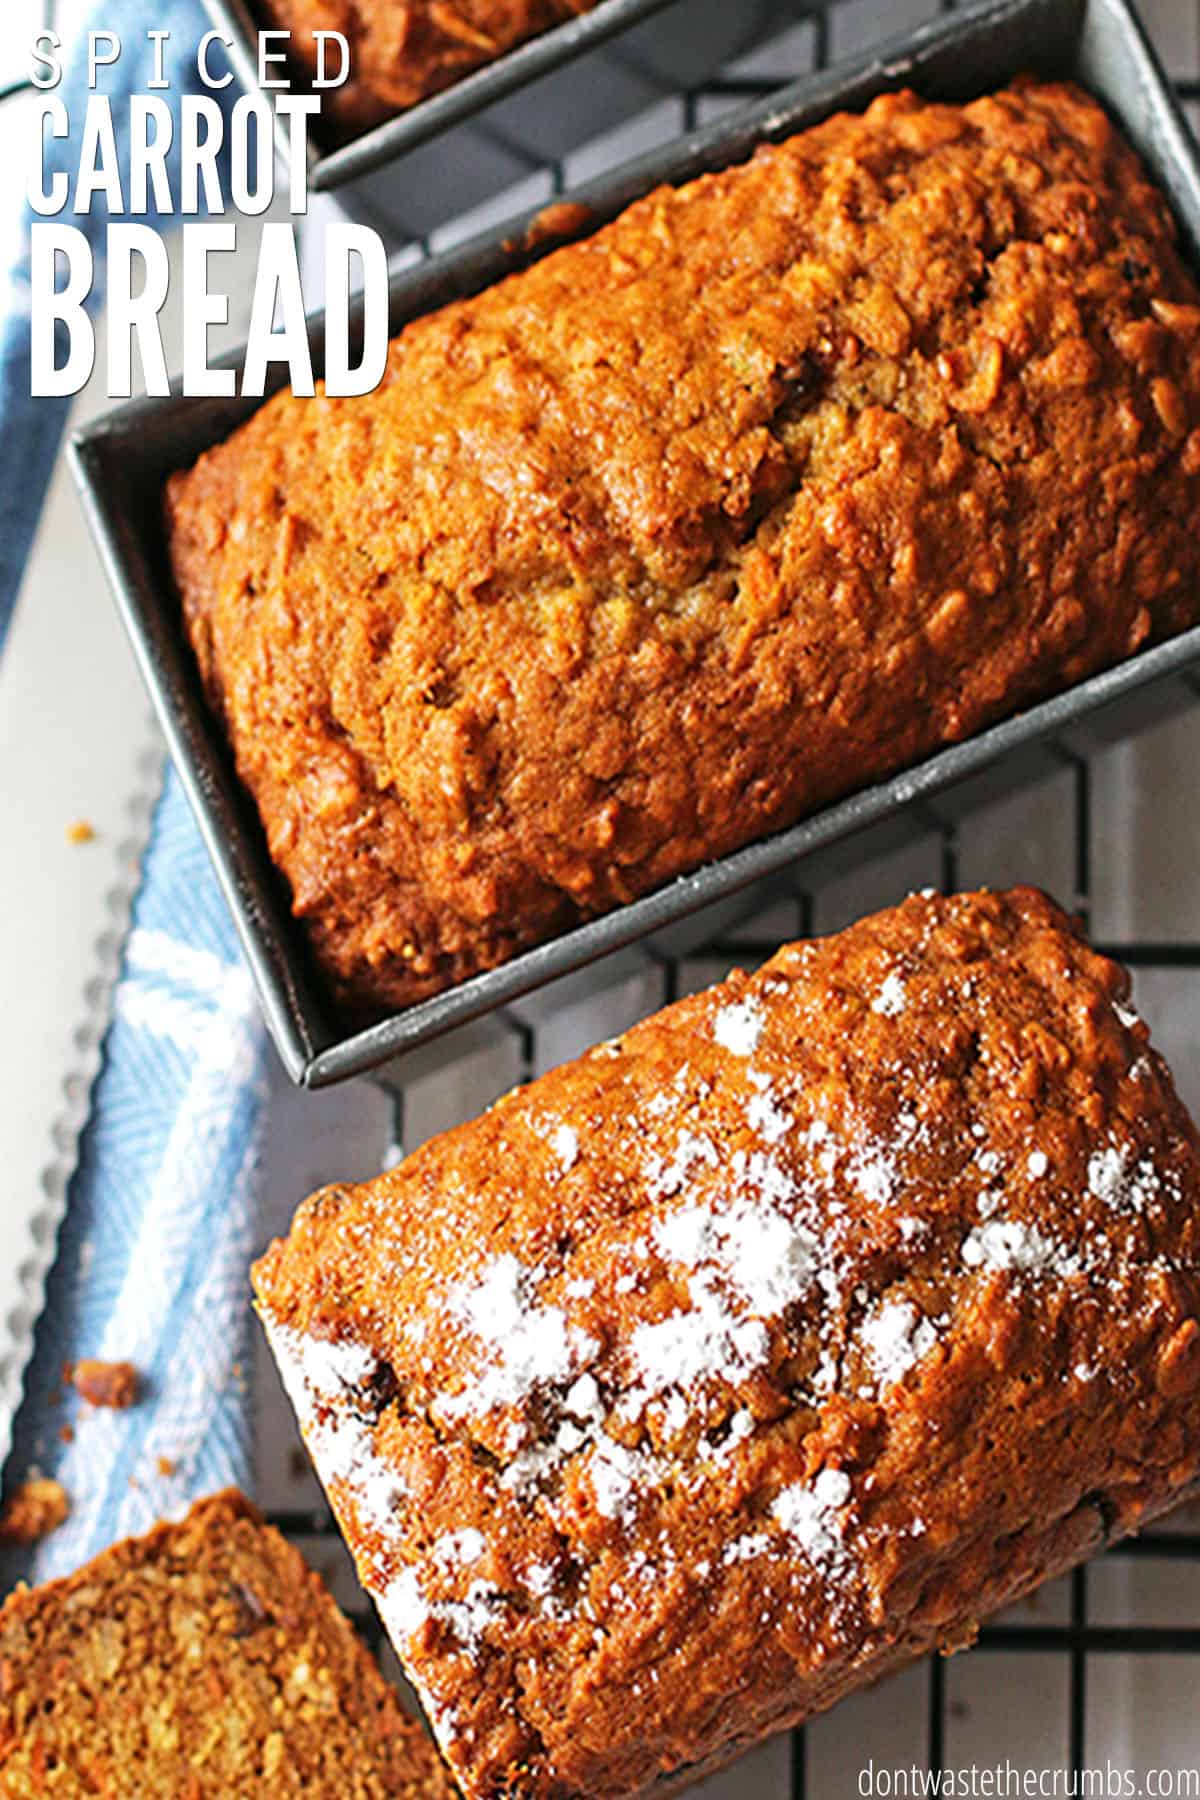 Two carrot bread loaves, one still in the loaf pan and one dusted with powdered sugar, sit atop a blue and white towel. Text overlay reads "Spiced Carrot Bread."